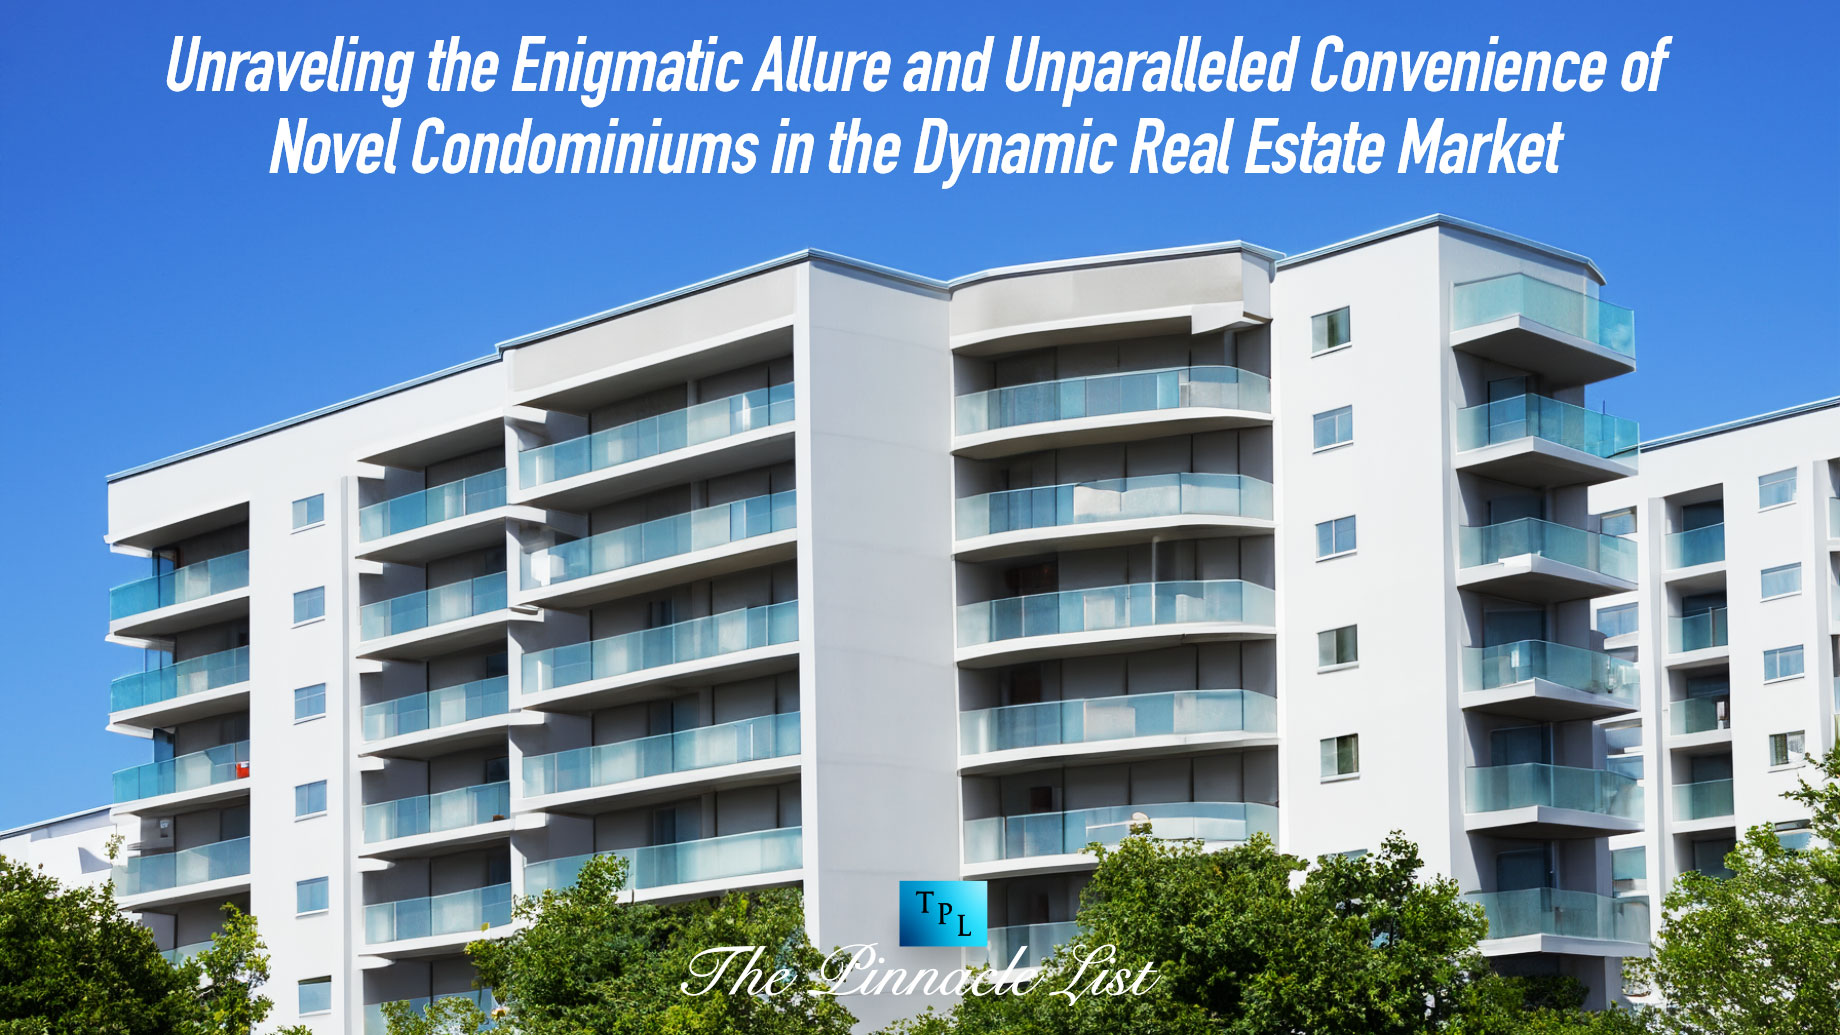 Unraveling the Enigmatic Allure and Unparalleled Convenience of Novel Condominiums in the Dynamic Real Estate Market